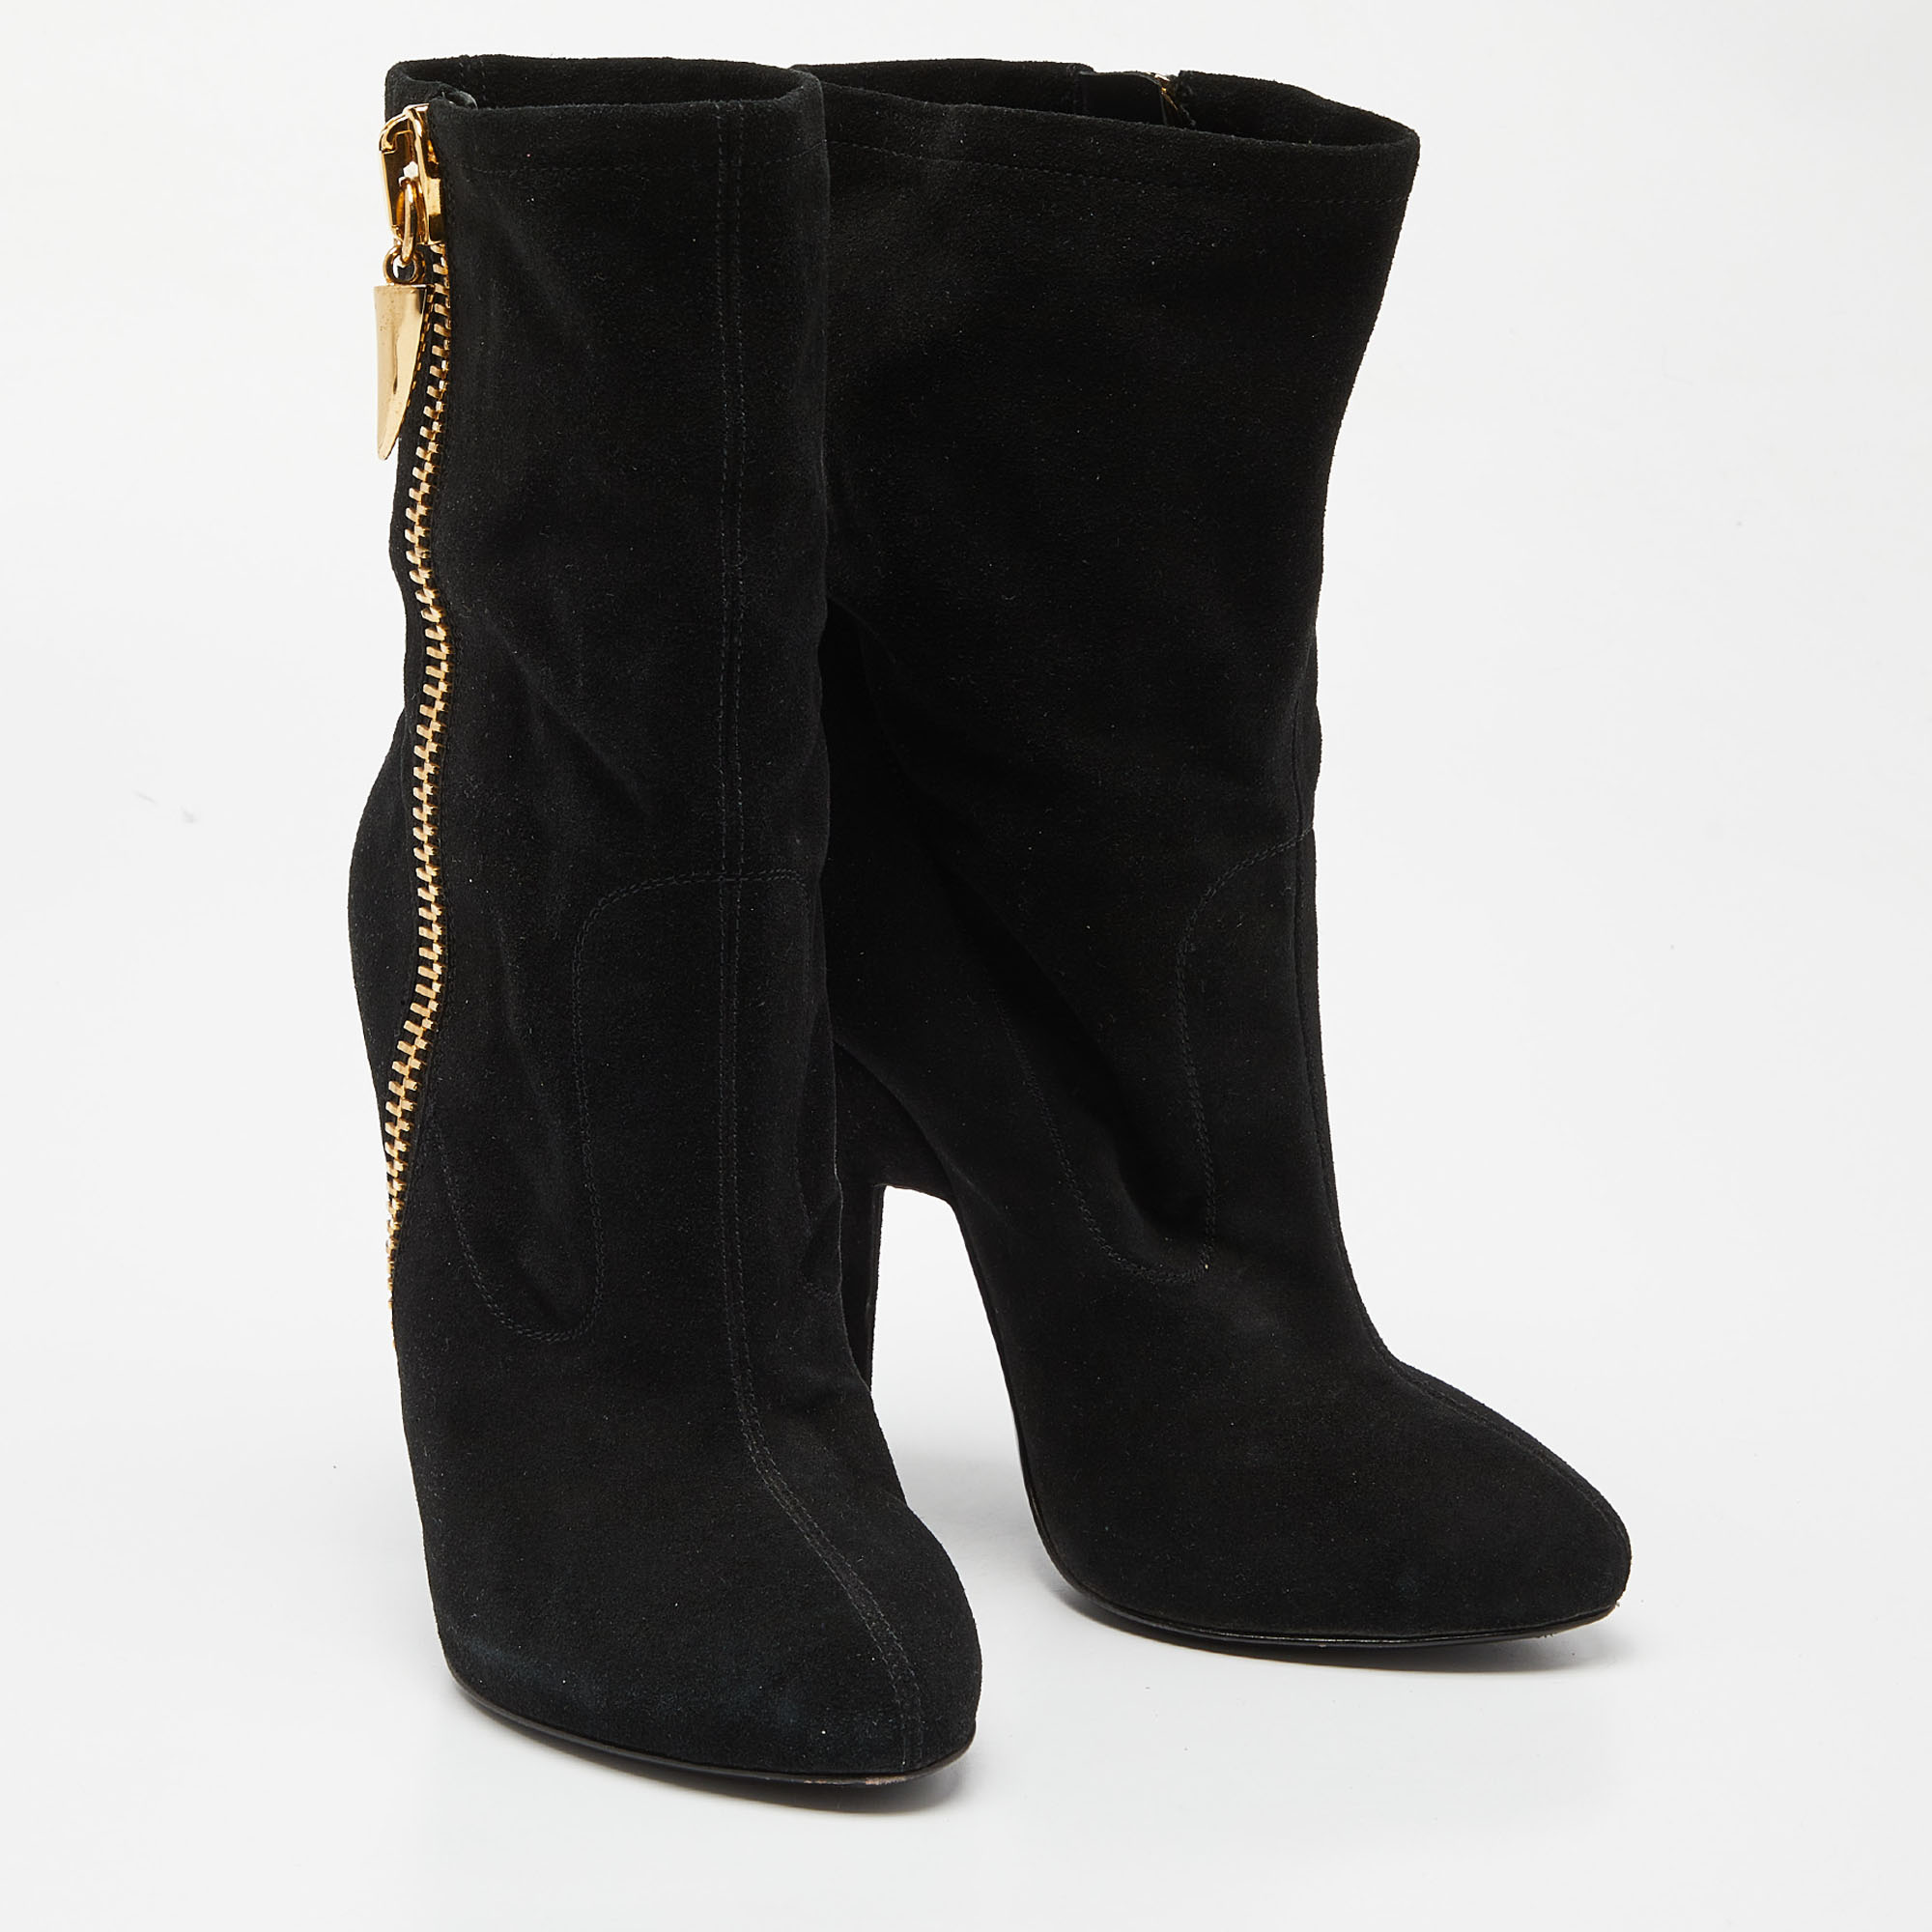 Giuseppe Zanotti Black Suede Ankle Booties Size 38